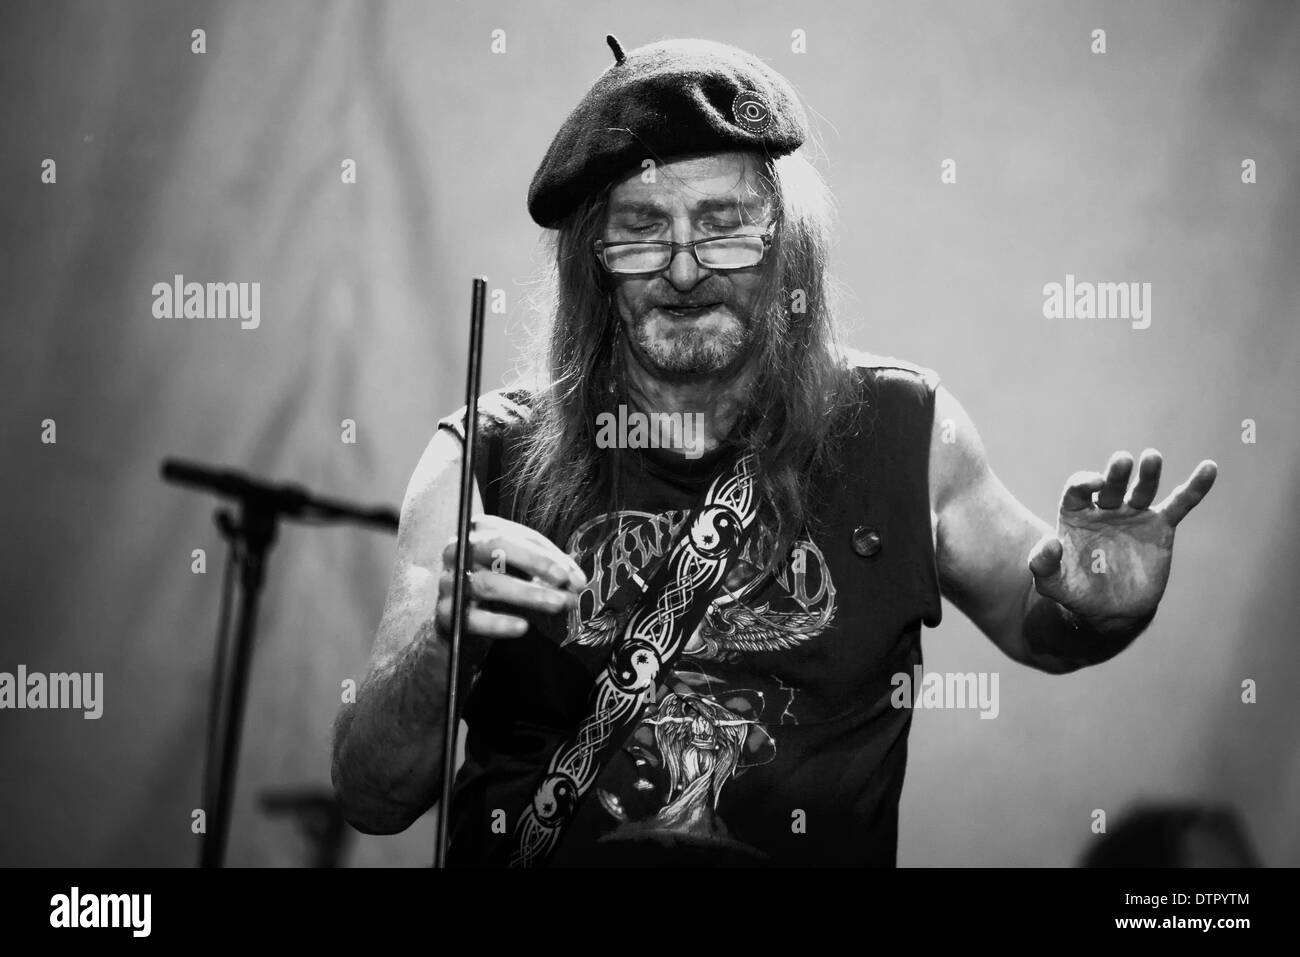 London, UK. 22nd Feb, 2014. 'Tim Blake' preforms at the Rock 4 Rescue and Hawkwind concert raising awareness of Animal Cruelty compered by TV presenter Matthew Wright at the O2 Shepherds Bush Empire in London. See Li Photo Capital/Alamy Live News Stock Photo